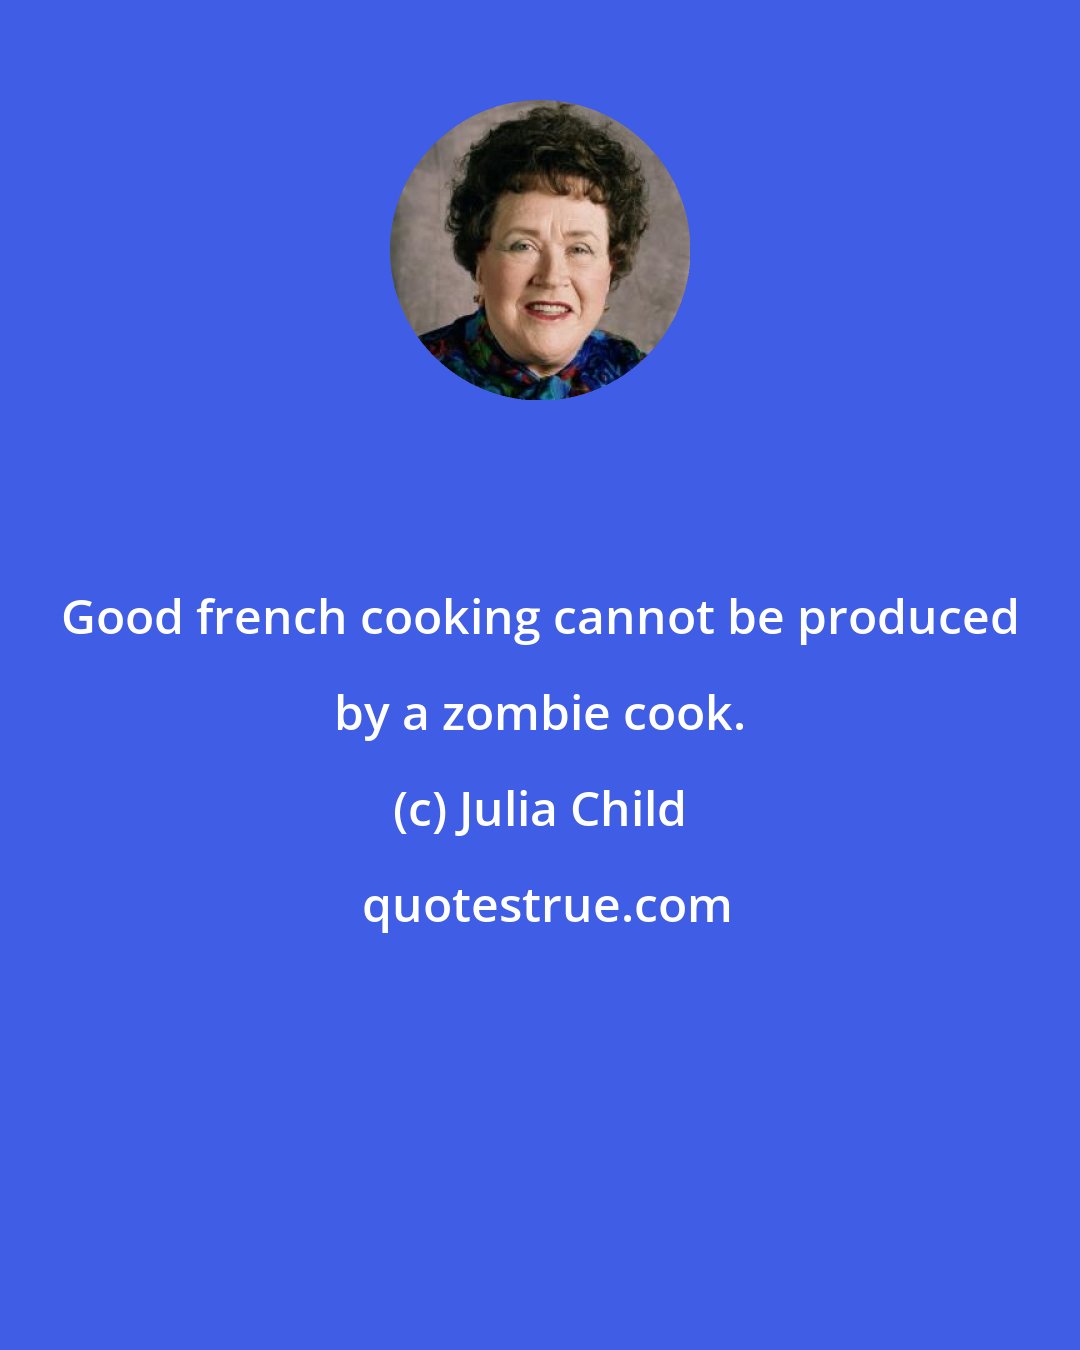 Julia Child: Good french cooking cannot be produced by a zombie cook.